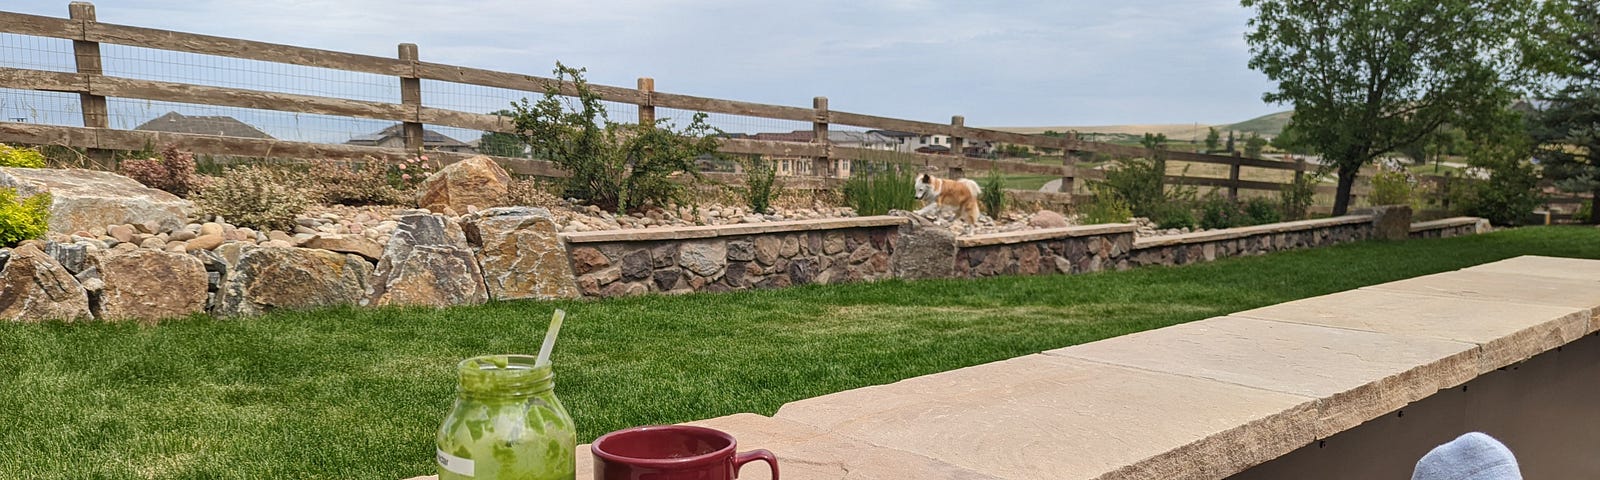 A green drink and red coffee mug are on a ledge in a backyard. On the right there are white socked feet relaxing. On the left is green grass and a dog in the background.